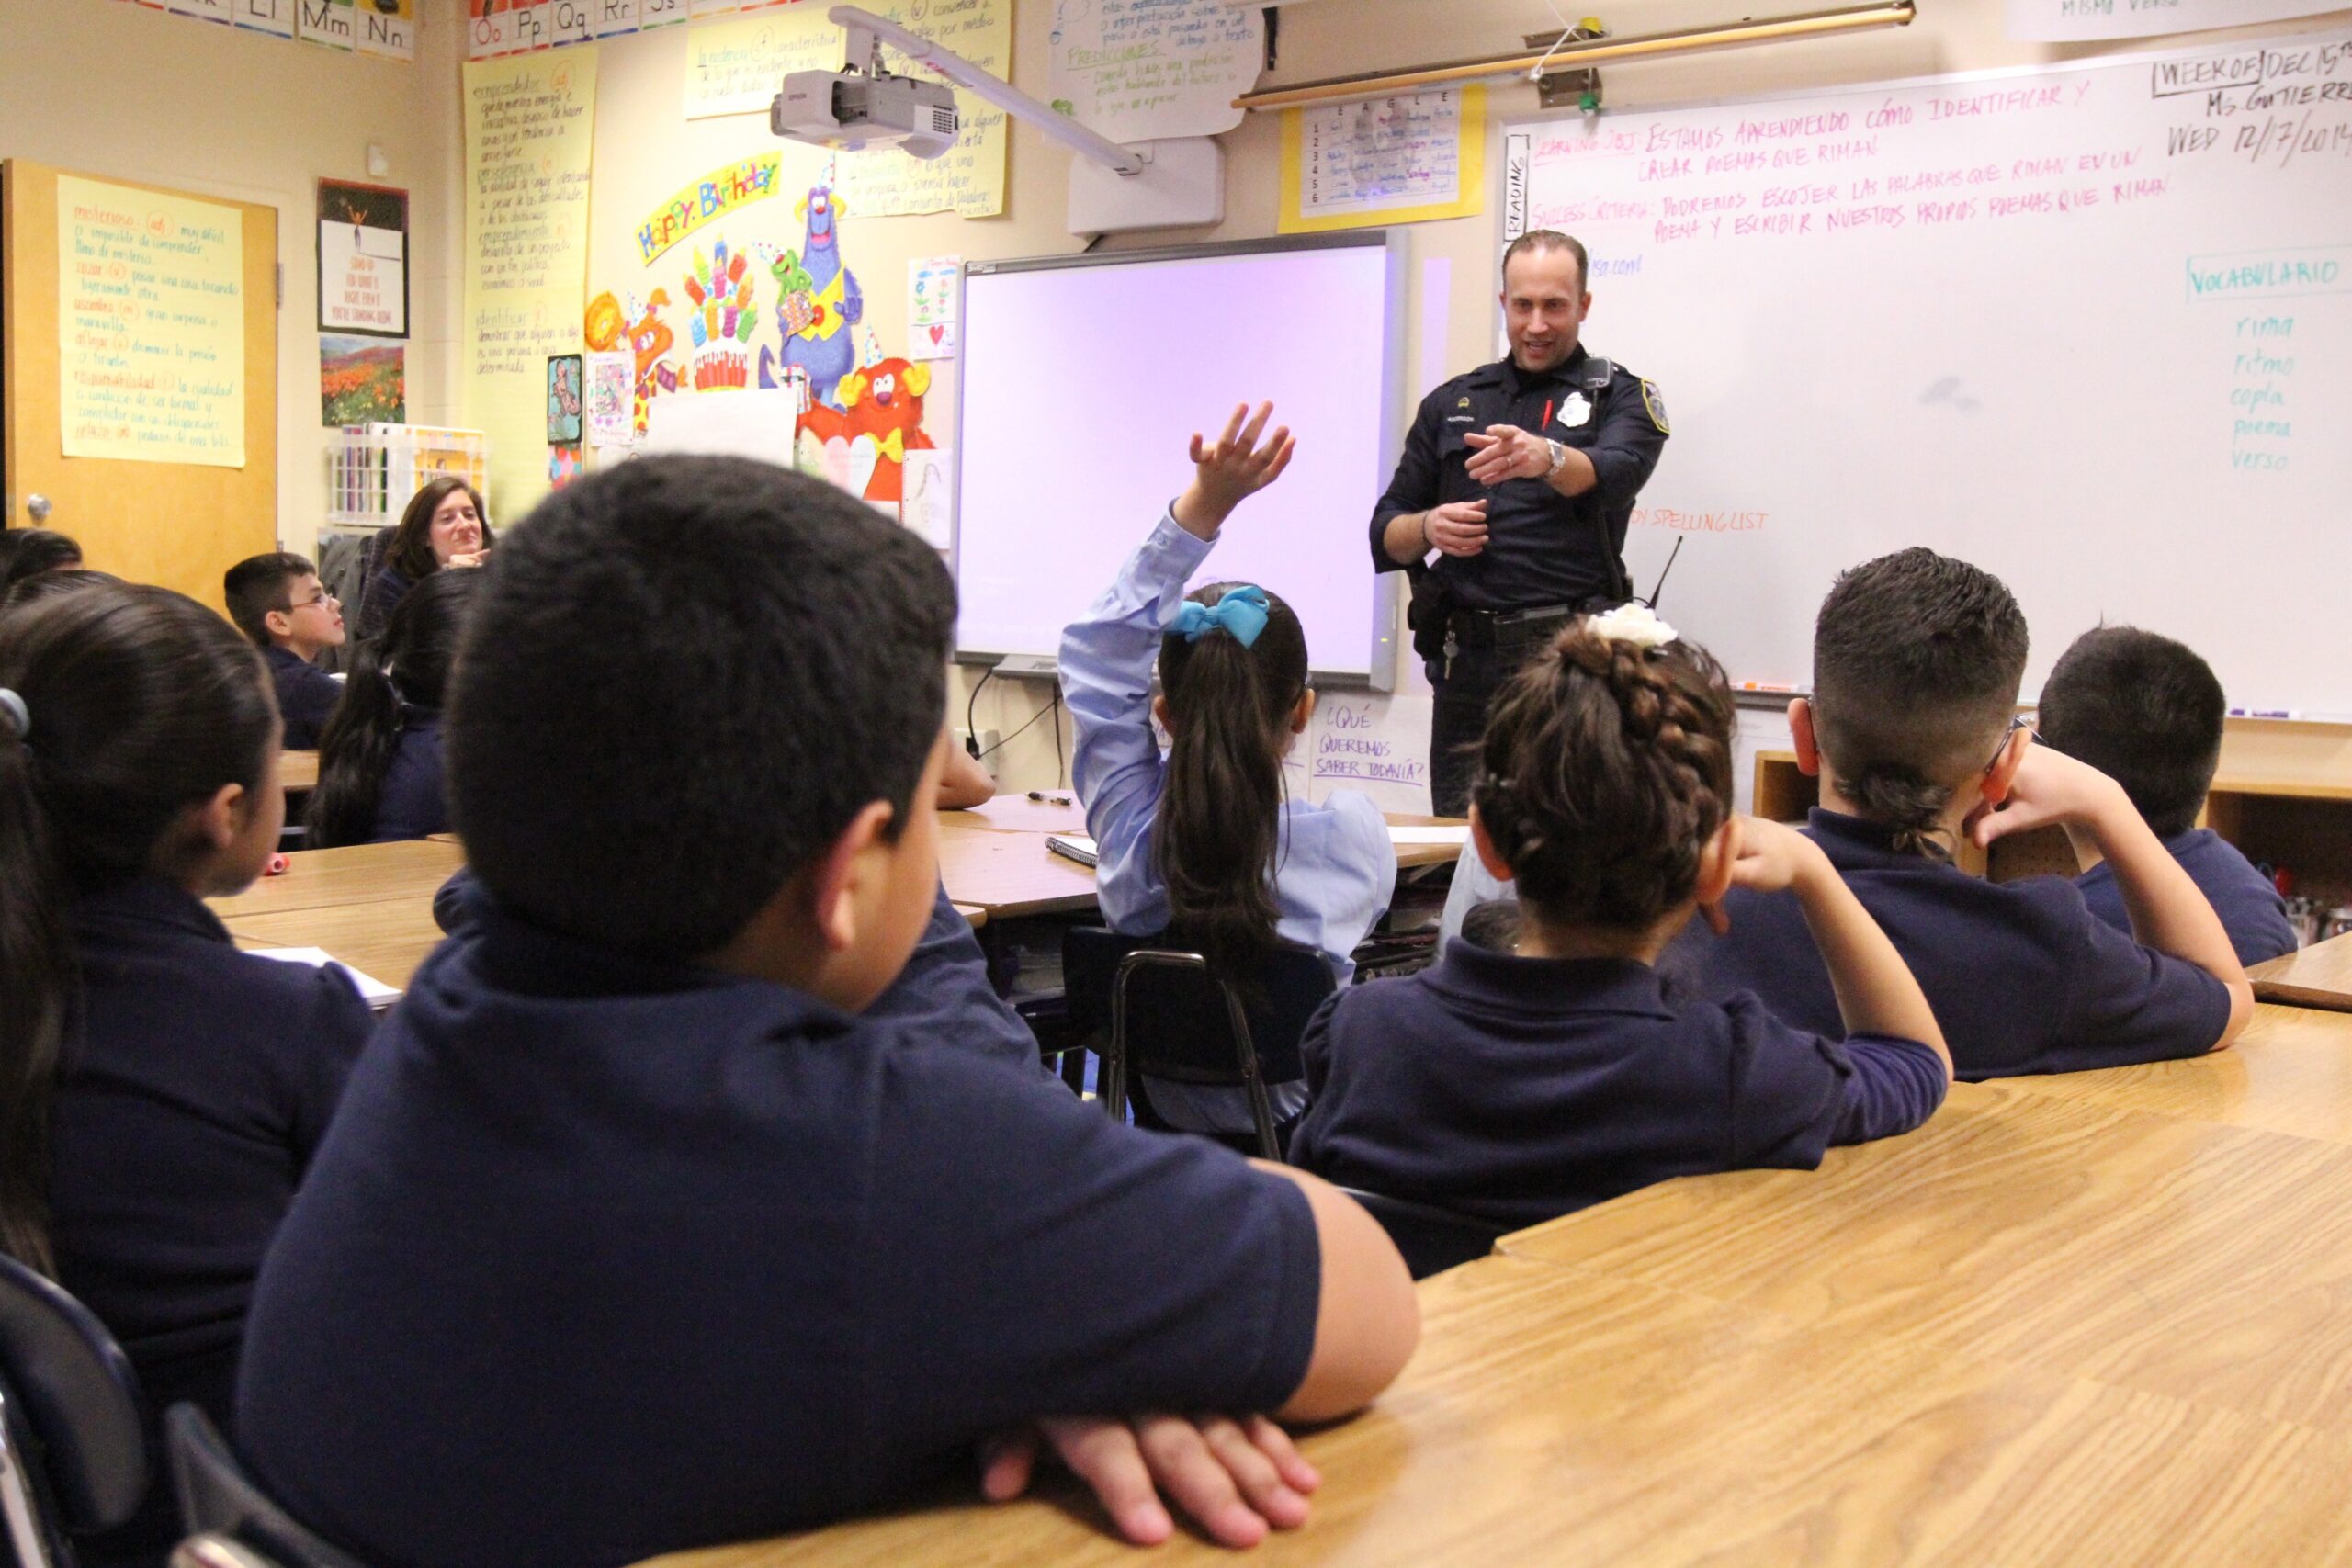 Milwaukee Officer in classroom